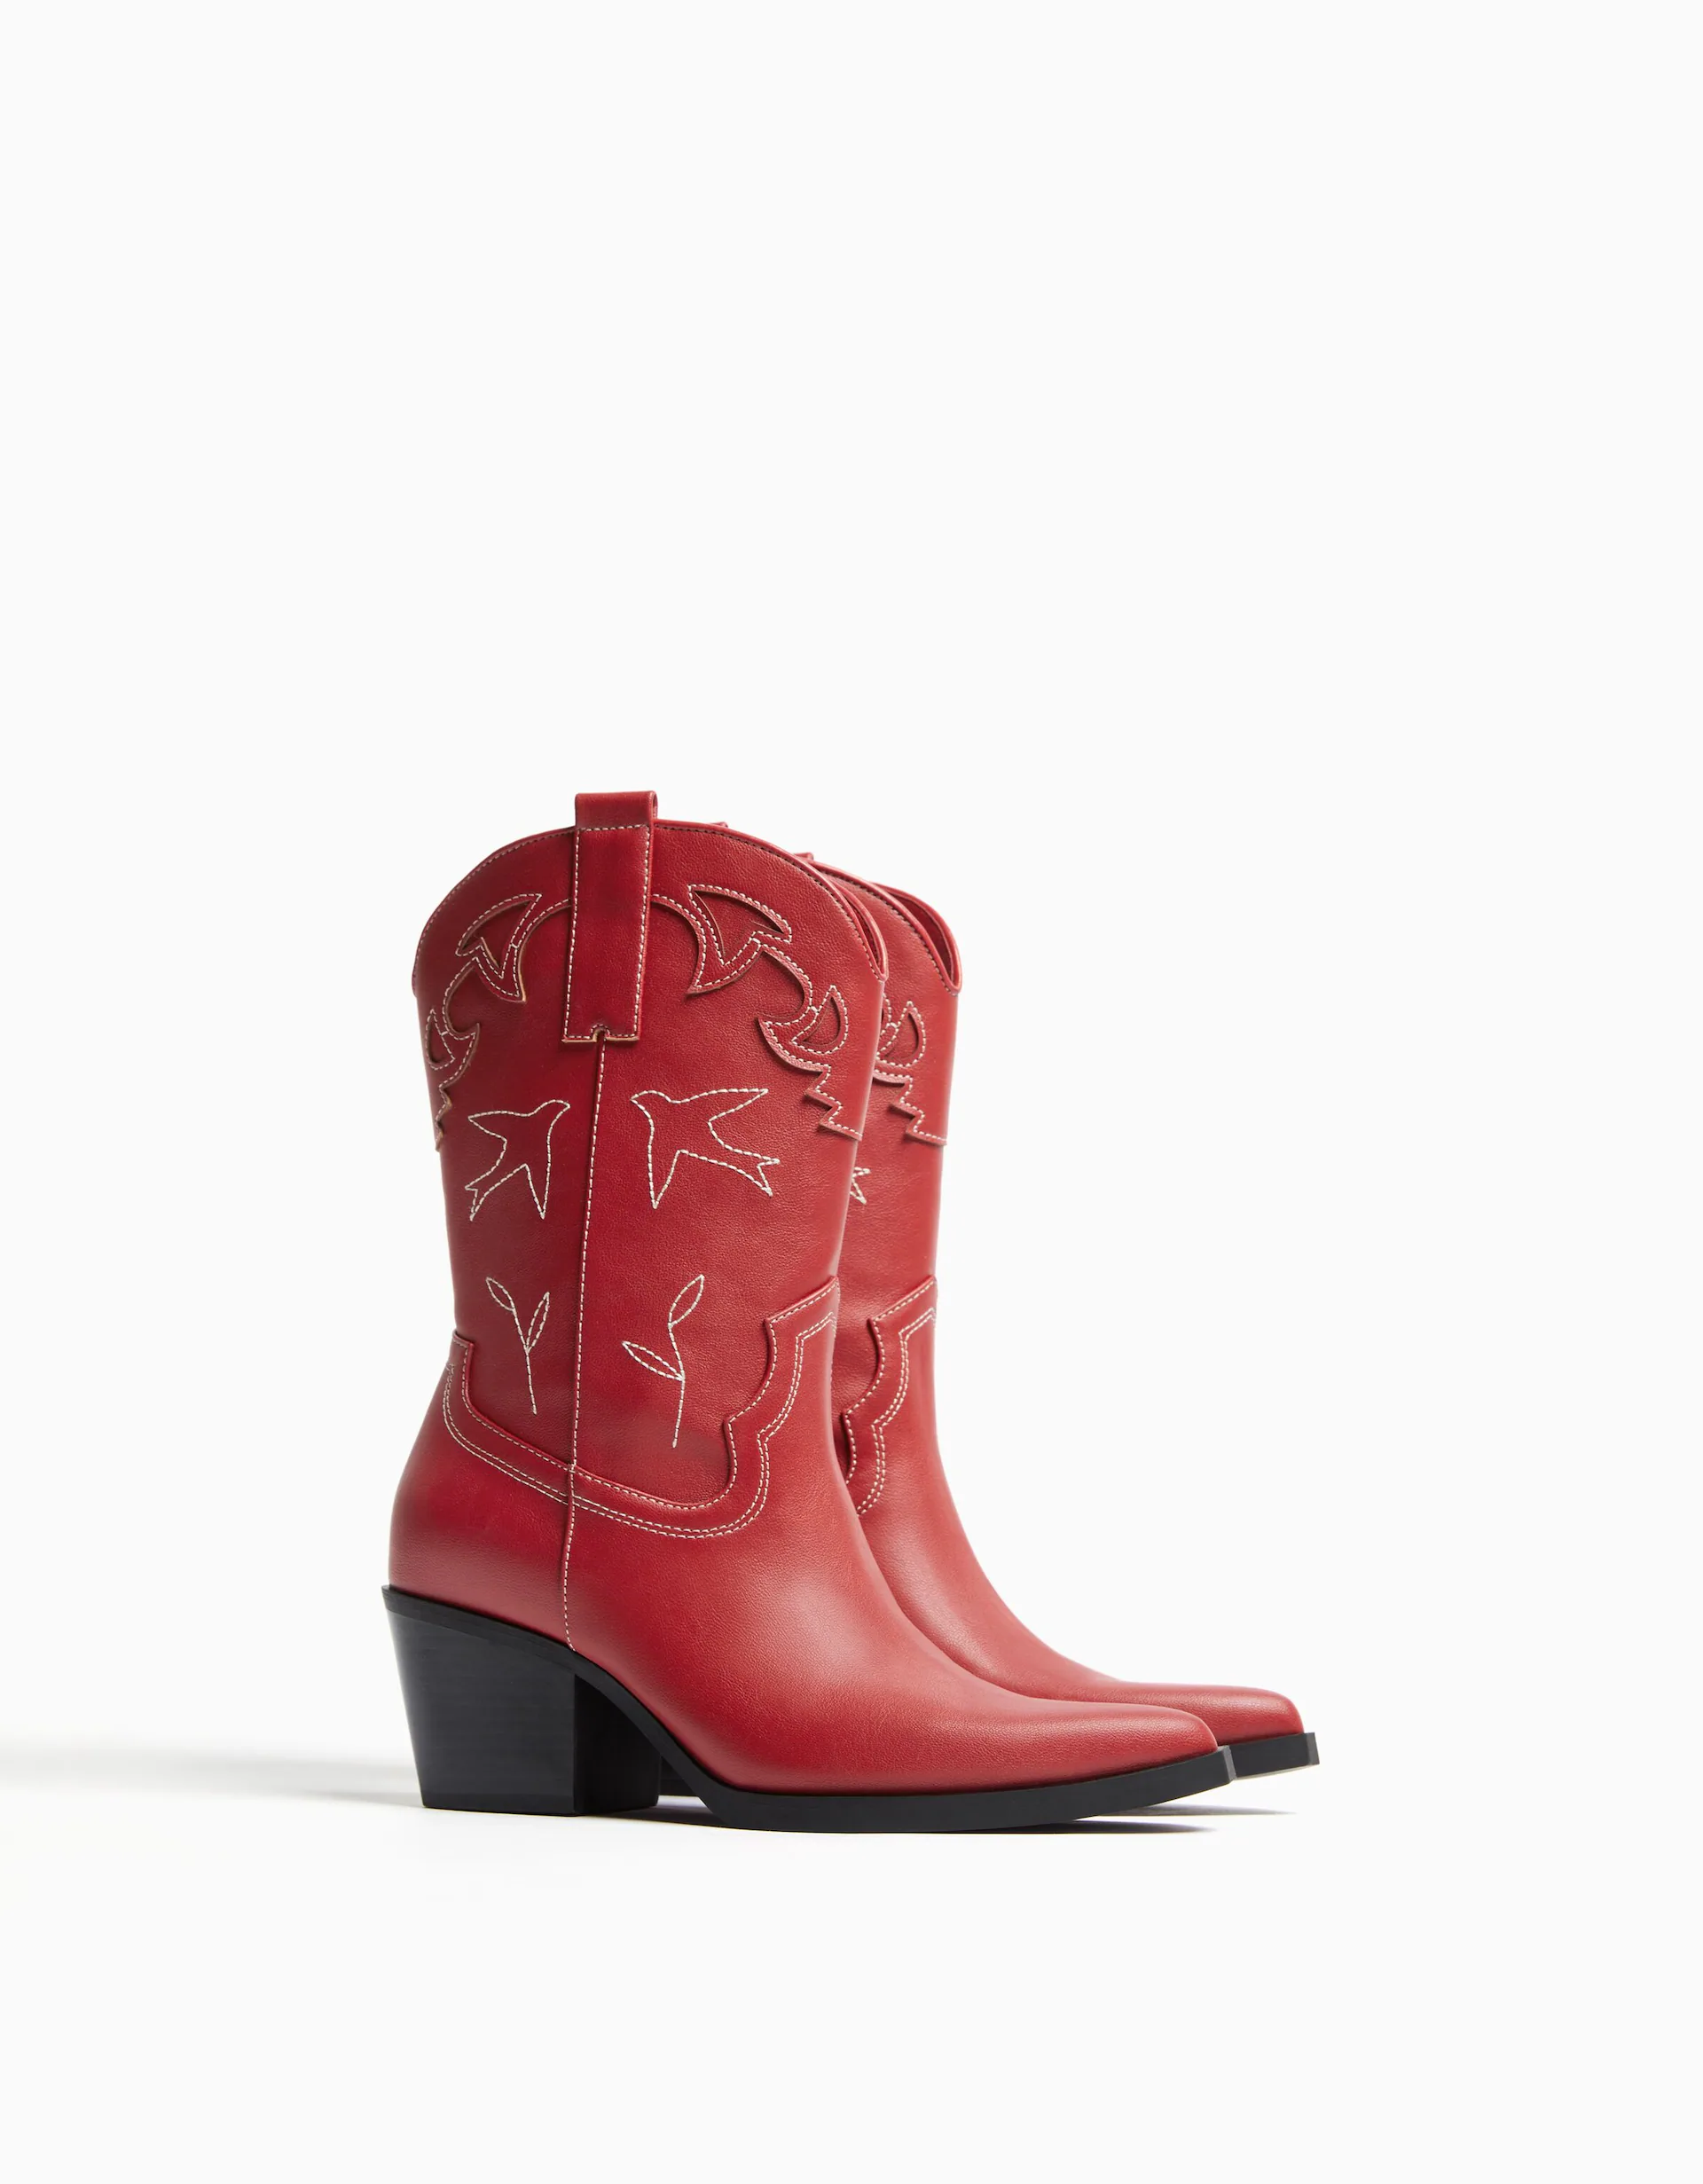 Bershka cowboy boots in red